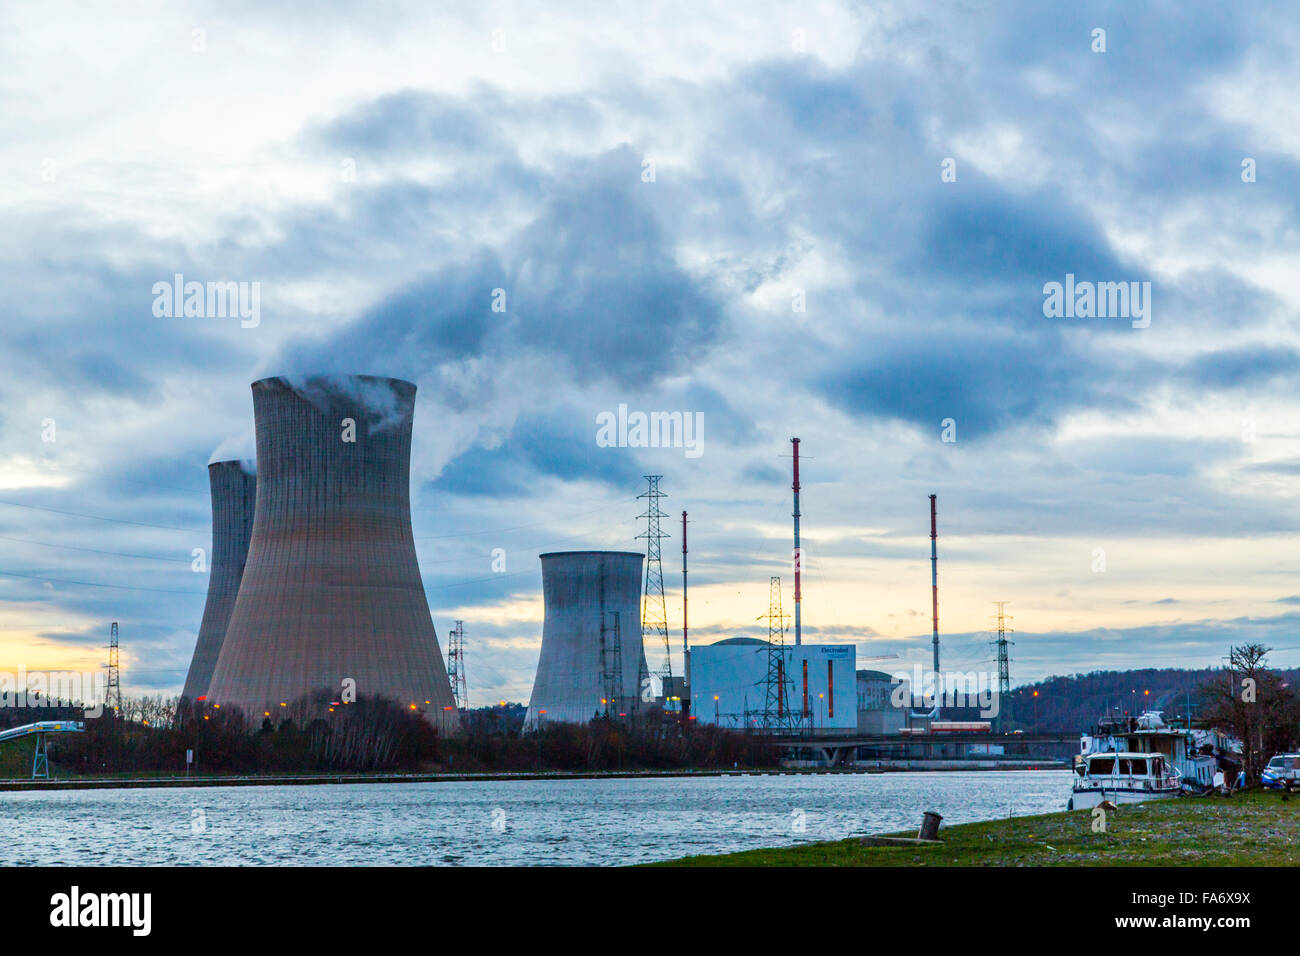 The Belgian nuclear power plant Tihange, 3 pressurized water reactor, in Huy, Belgium, at river Maas, run by Electrabel Group, Stock Photo